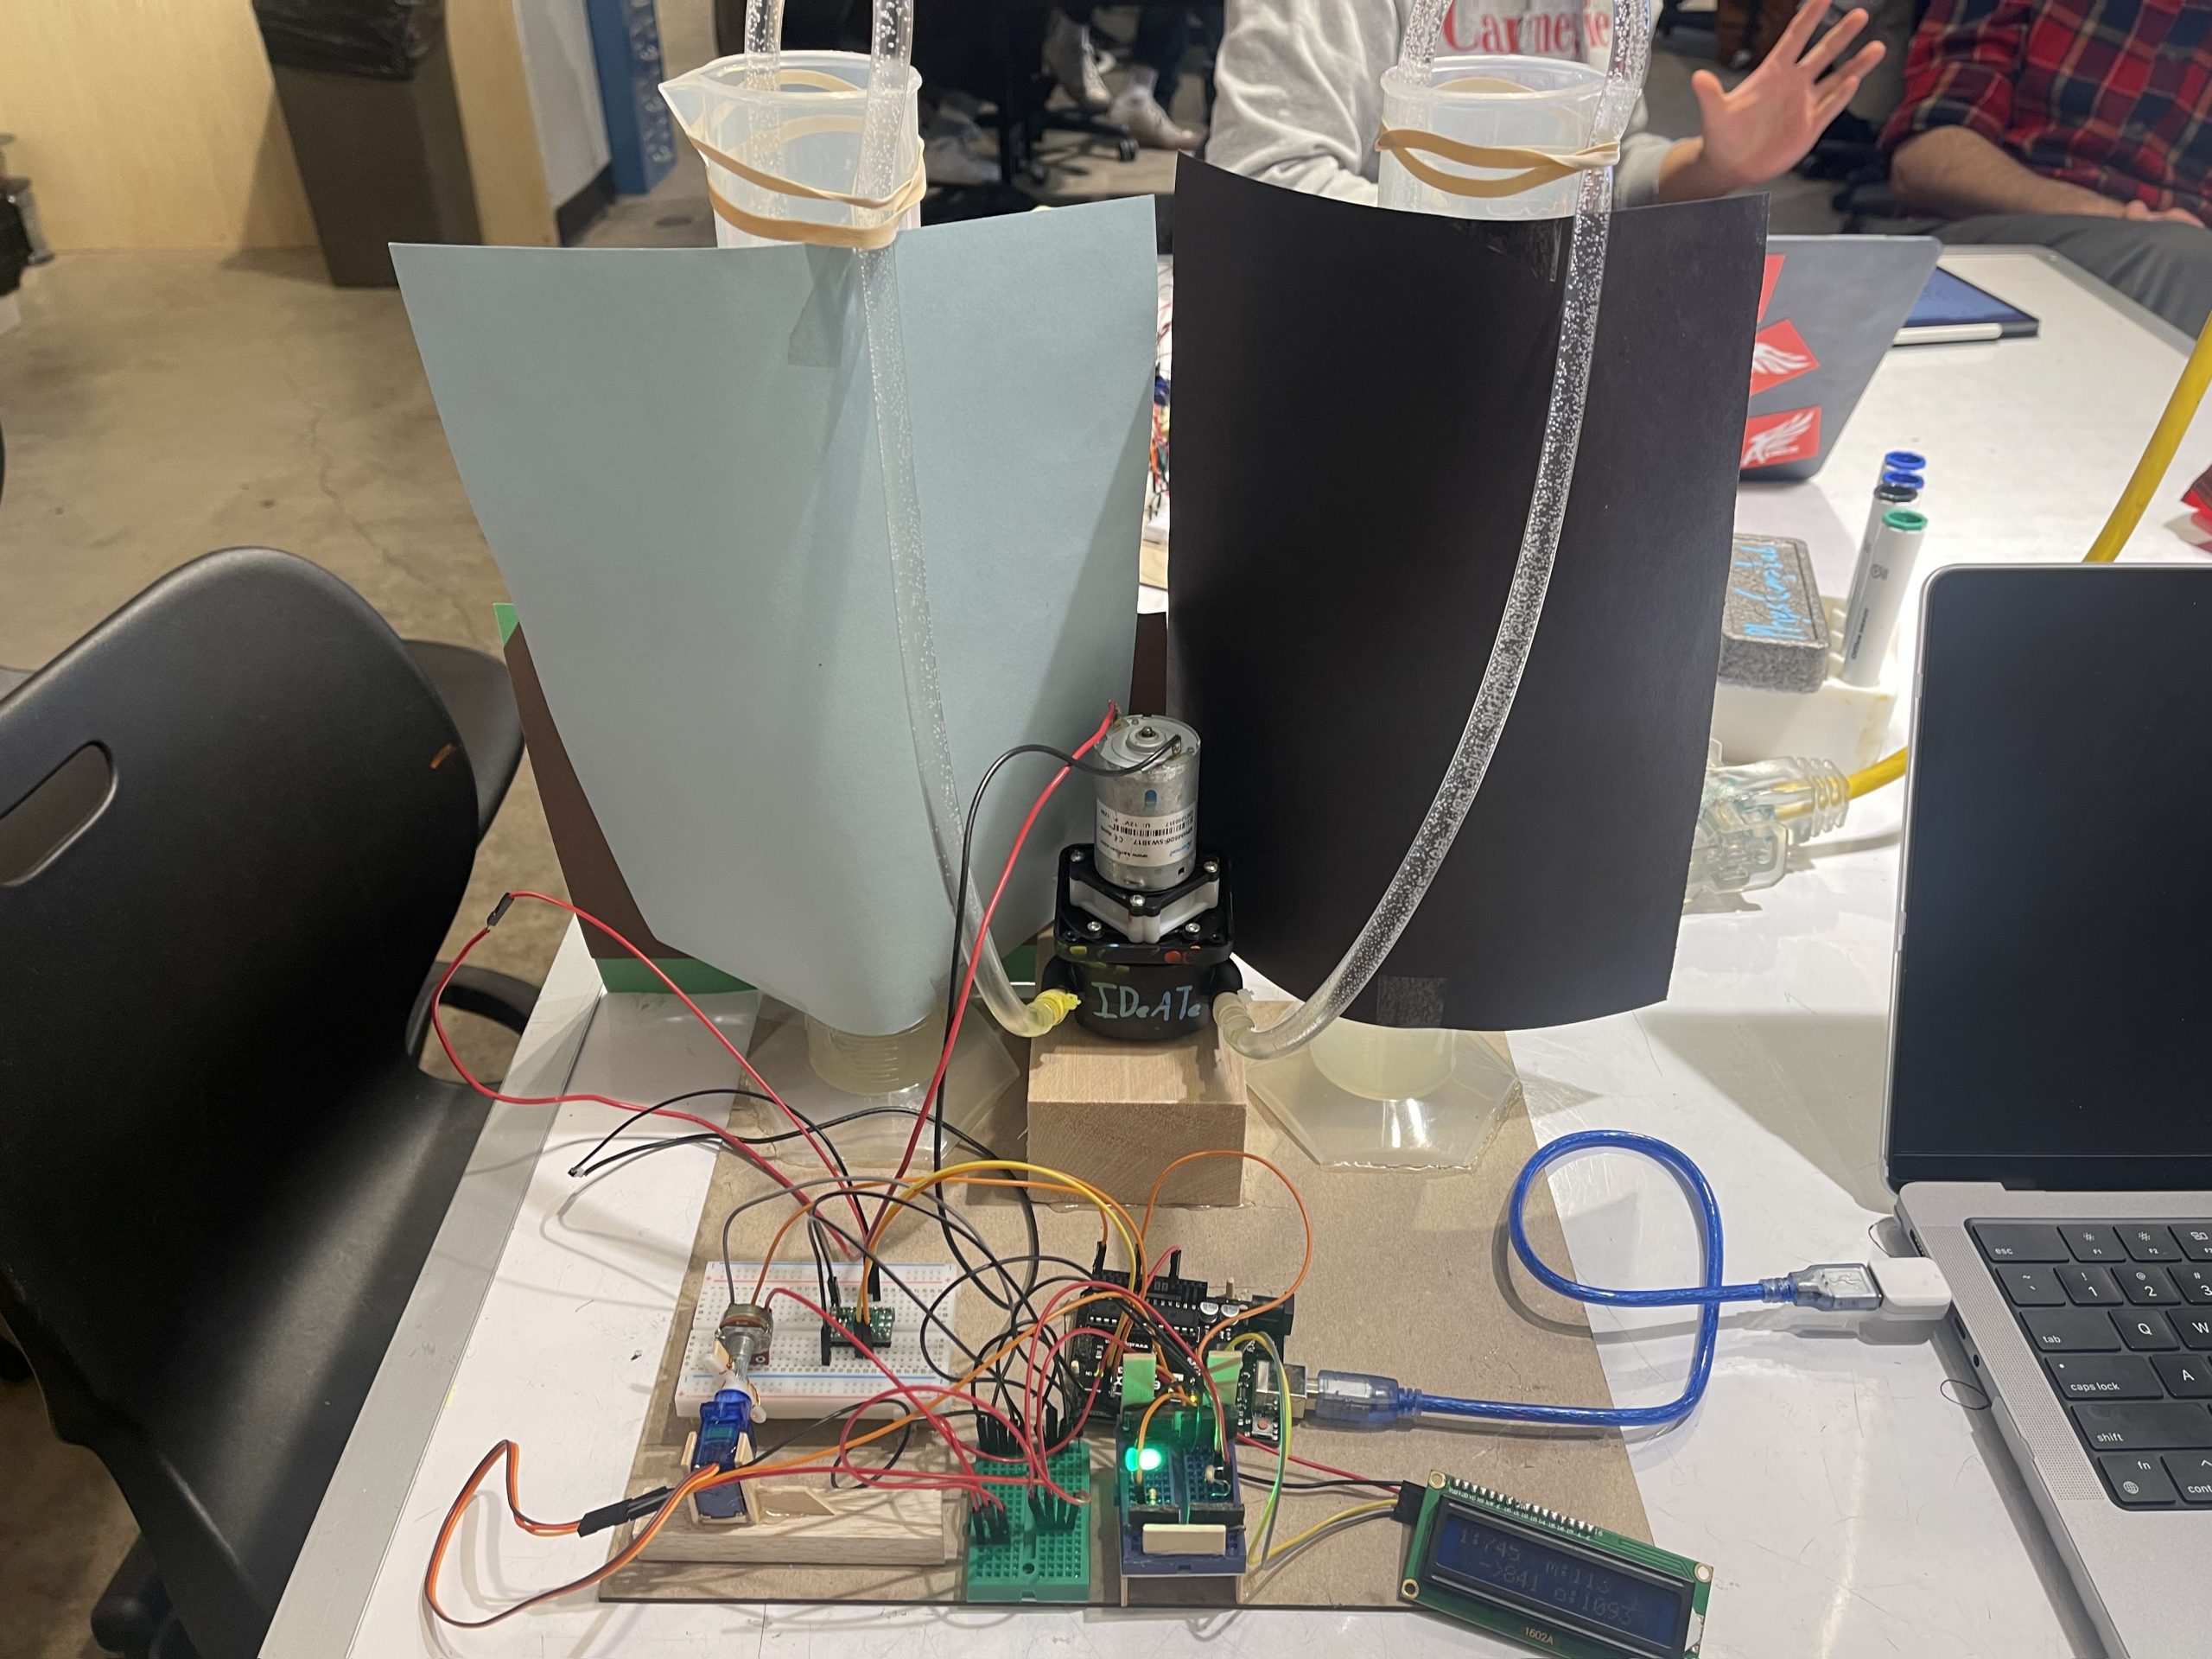 Top level view of project showing Arduino, transparency station, servo motor, potentiometer, peristaltic pump, and two graduated cylinders filled with water.